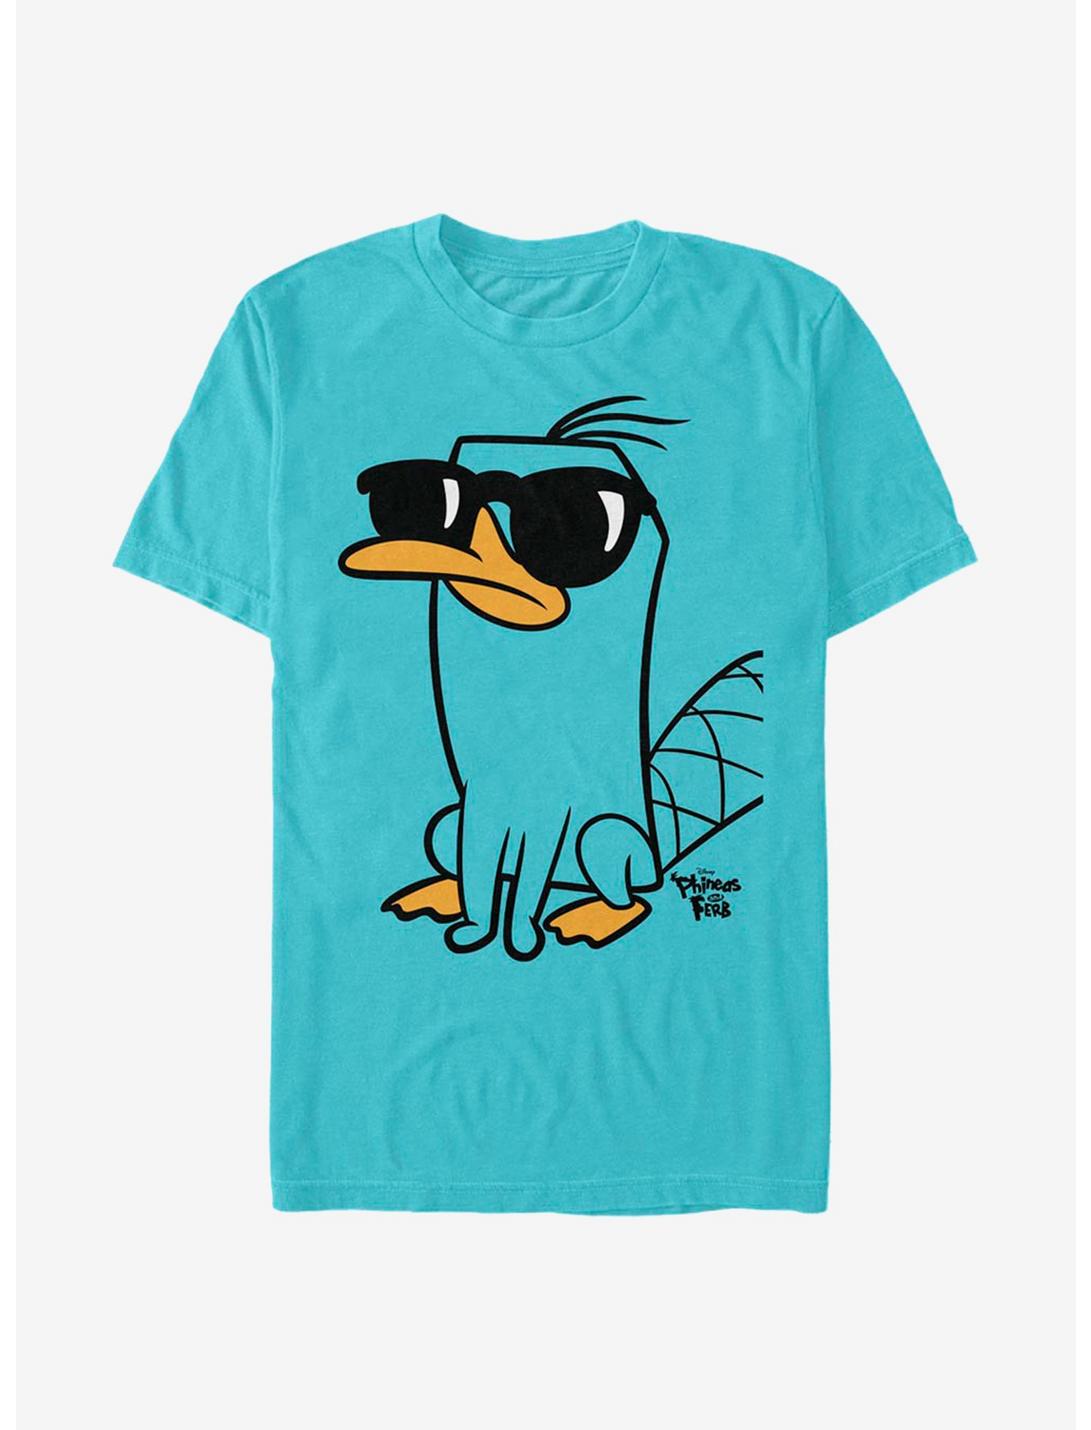 Disney Phineas And Ferb Cool Perry T-Shirt, TURQ, hi-res